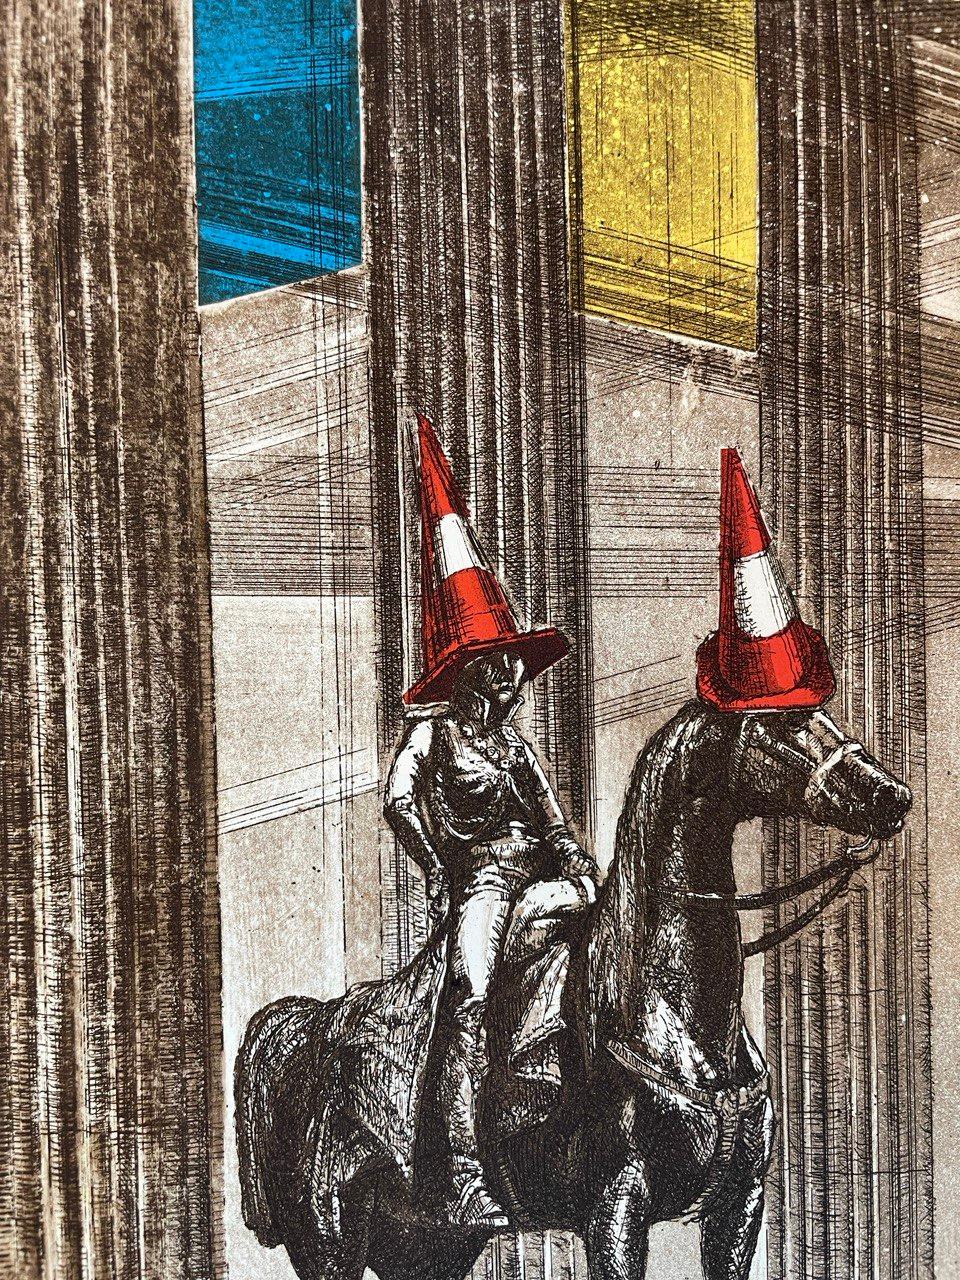 Duke of Wellington by Vladislav Khristenko

Size of the image - 25 x 15 cm
Size of the list  - 34 x 22.5 cm
Size in frame - 42 x 32 cm
Etching and aquatint on paper
#15 from edition of 25

Special edition that was created for Glasgow and